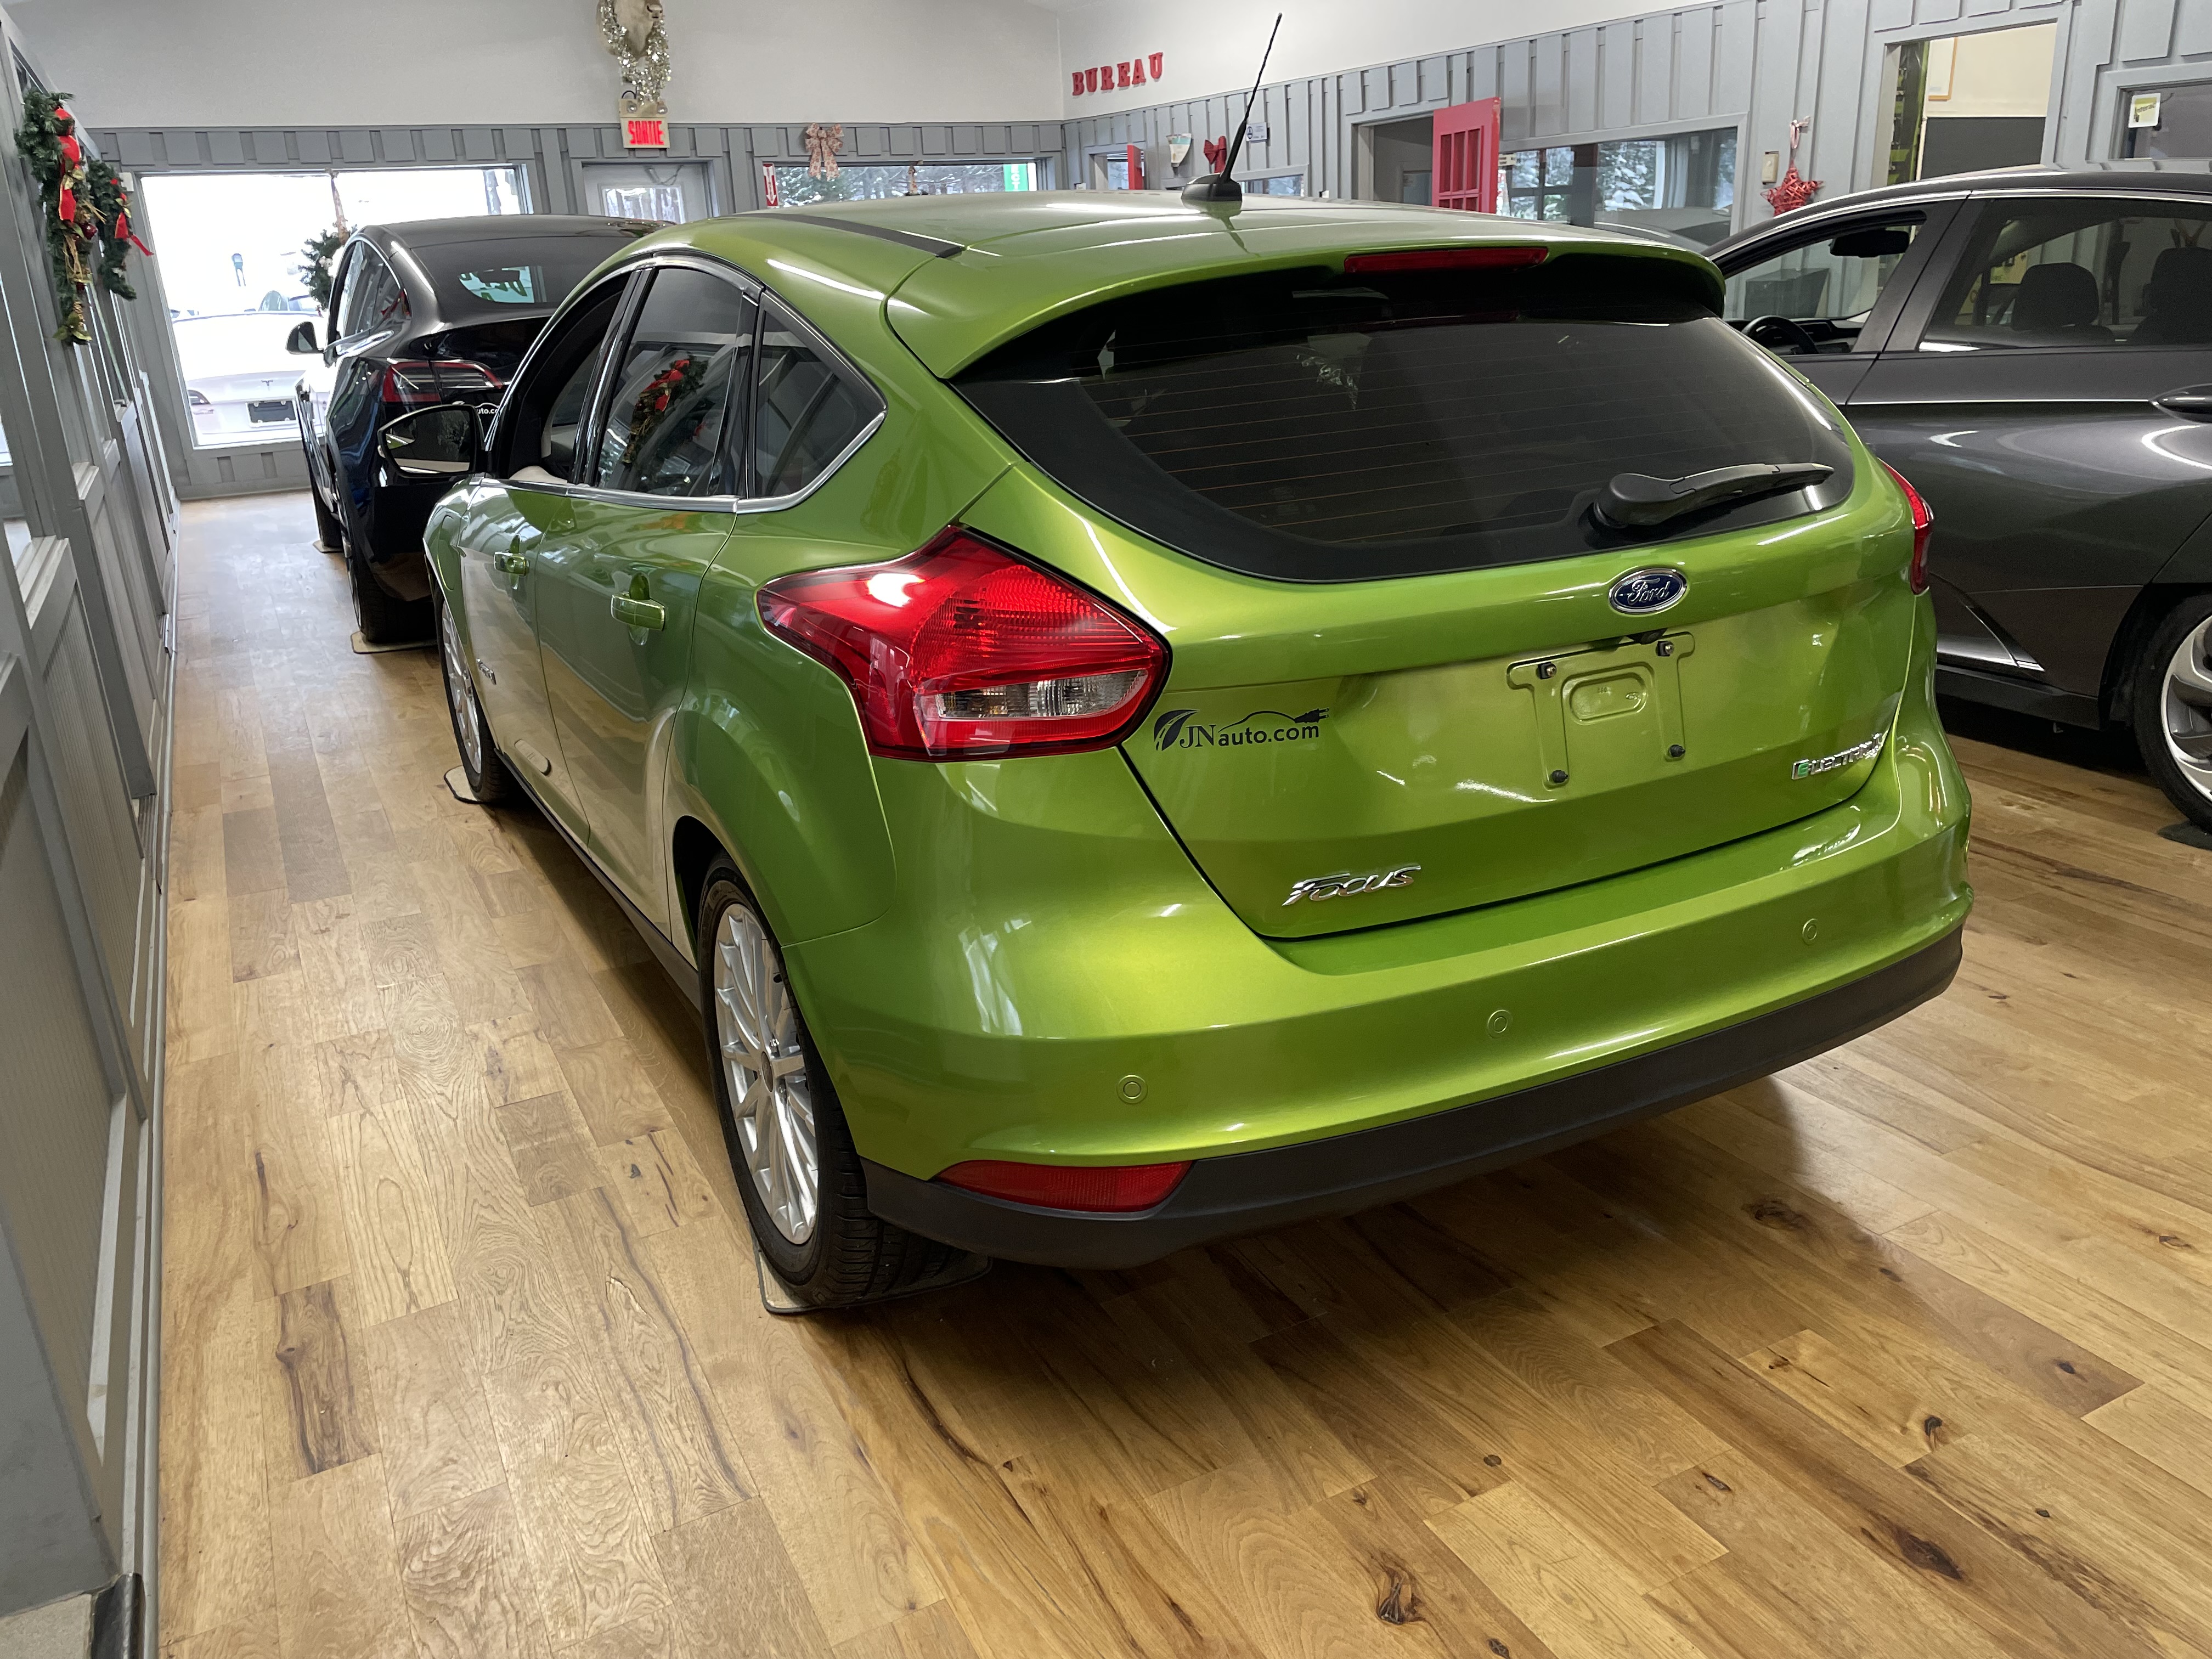 JN auto Ford Focus EV batt. 33.5kwh, chargeur 6.6 Kwh,Chargeur 400v combo, GPS 8608703 2018 Image 2